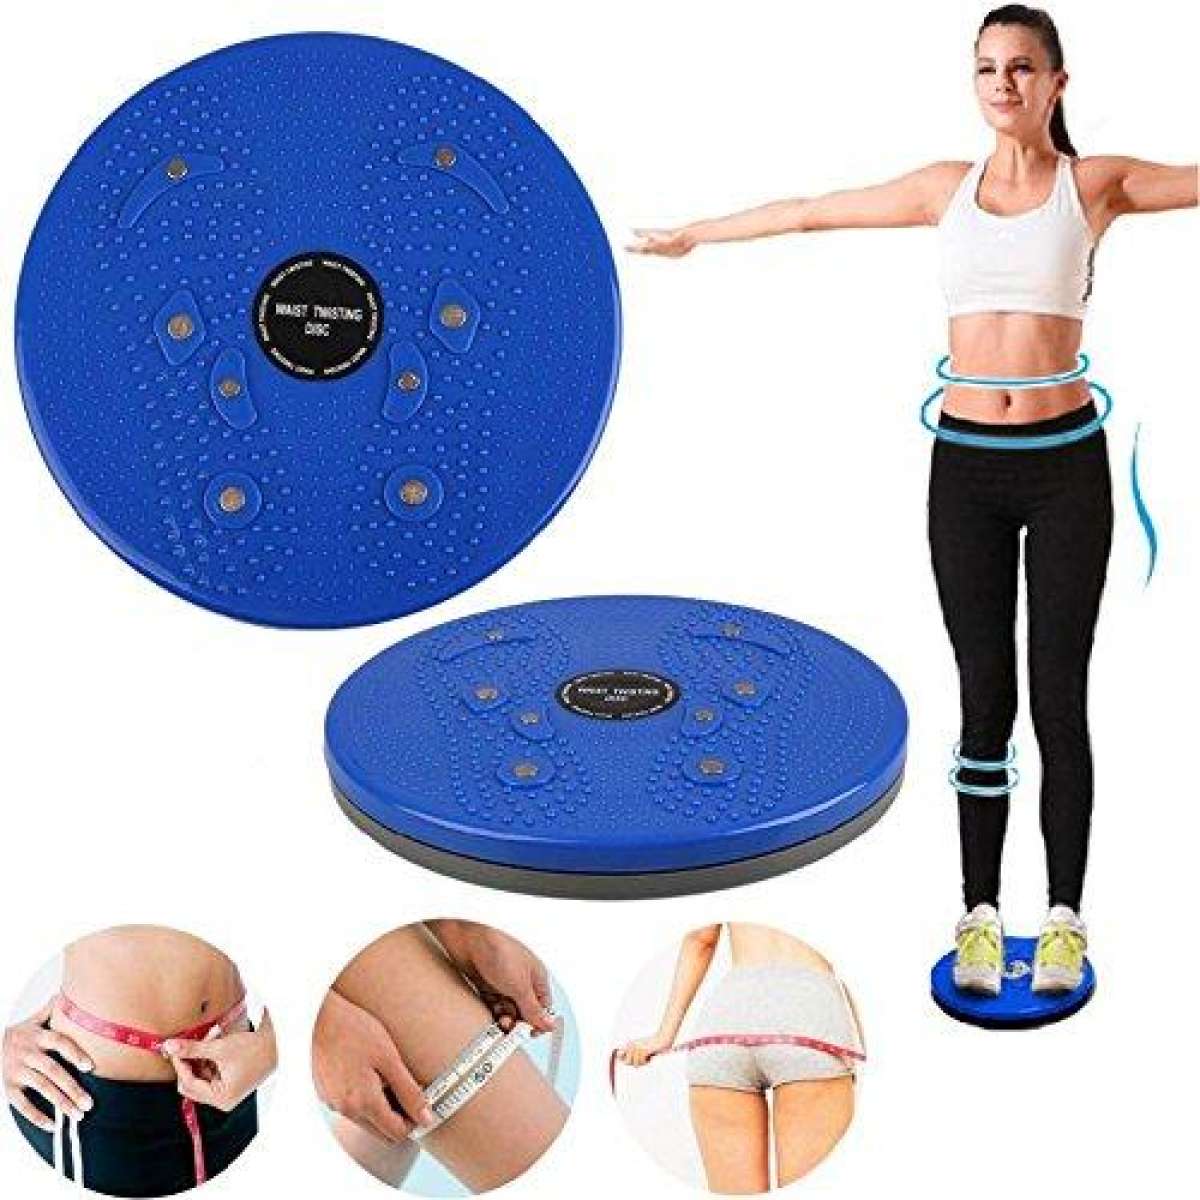 Slimming Exericiser with Rope Exercise with Foot Massage Waist